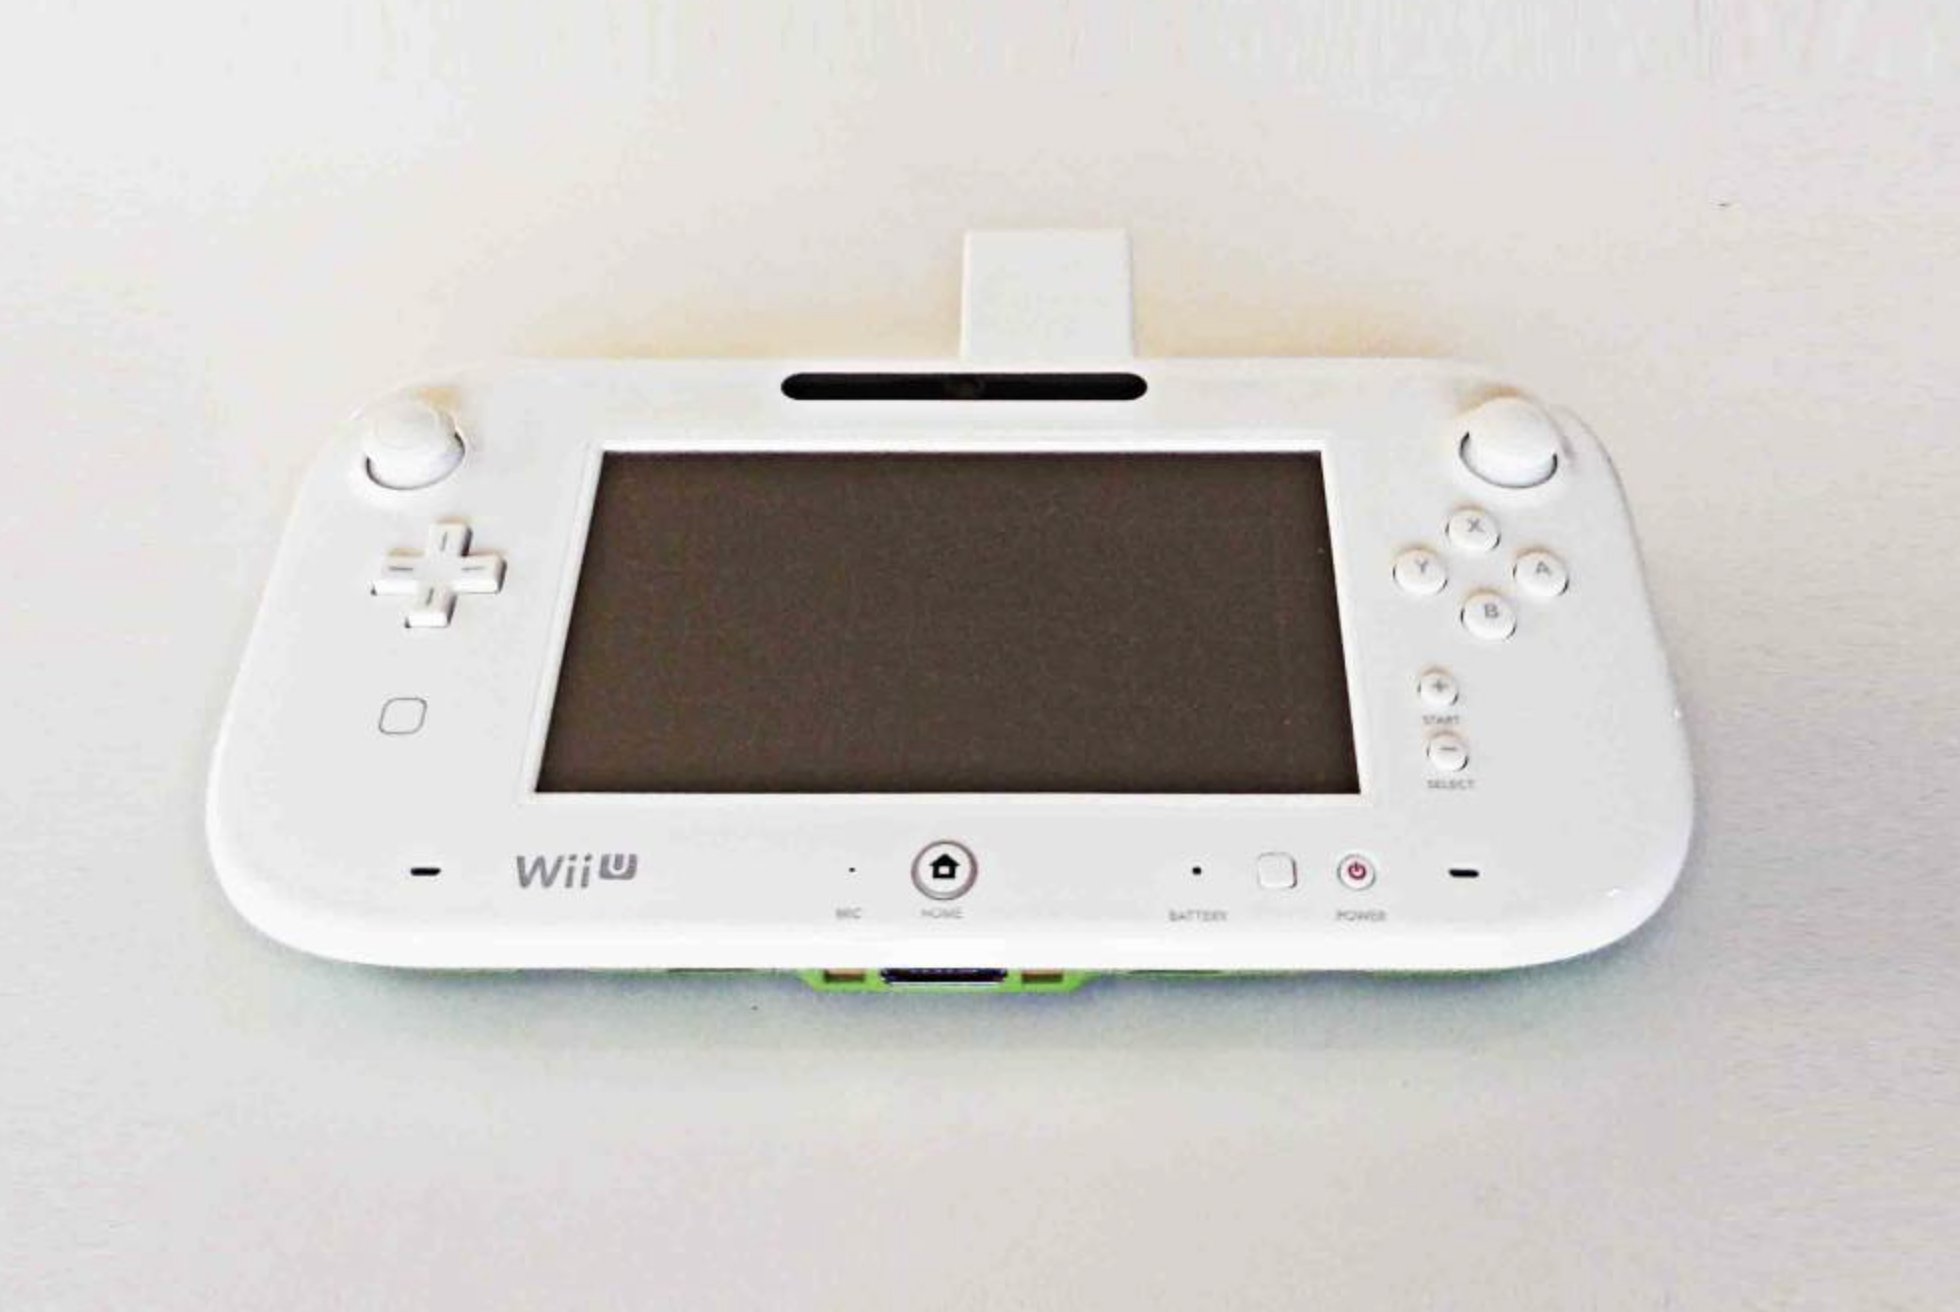 Cabel Someone S Also Selling A Brand New Wii U Cat Dev Development Kit Which Seems To Be A Hot Item Literally 1 000 Yen And 134 Bids So Far T Co Zzew4zchpt